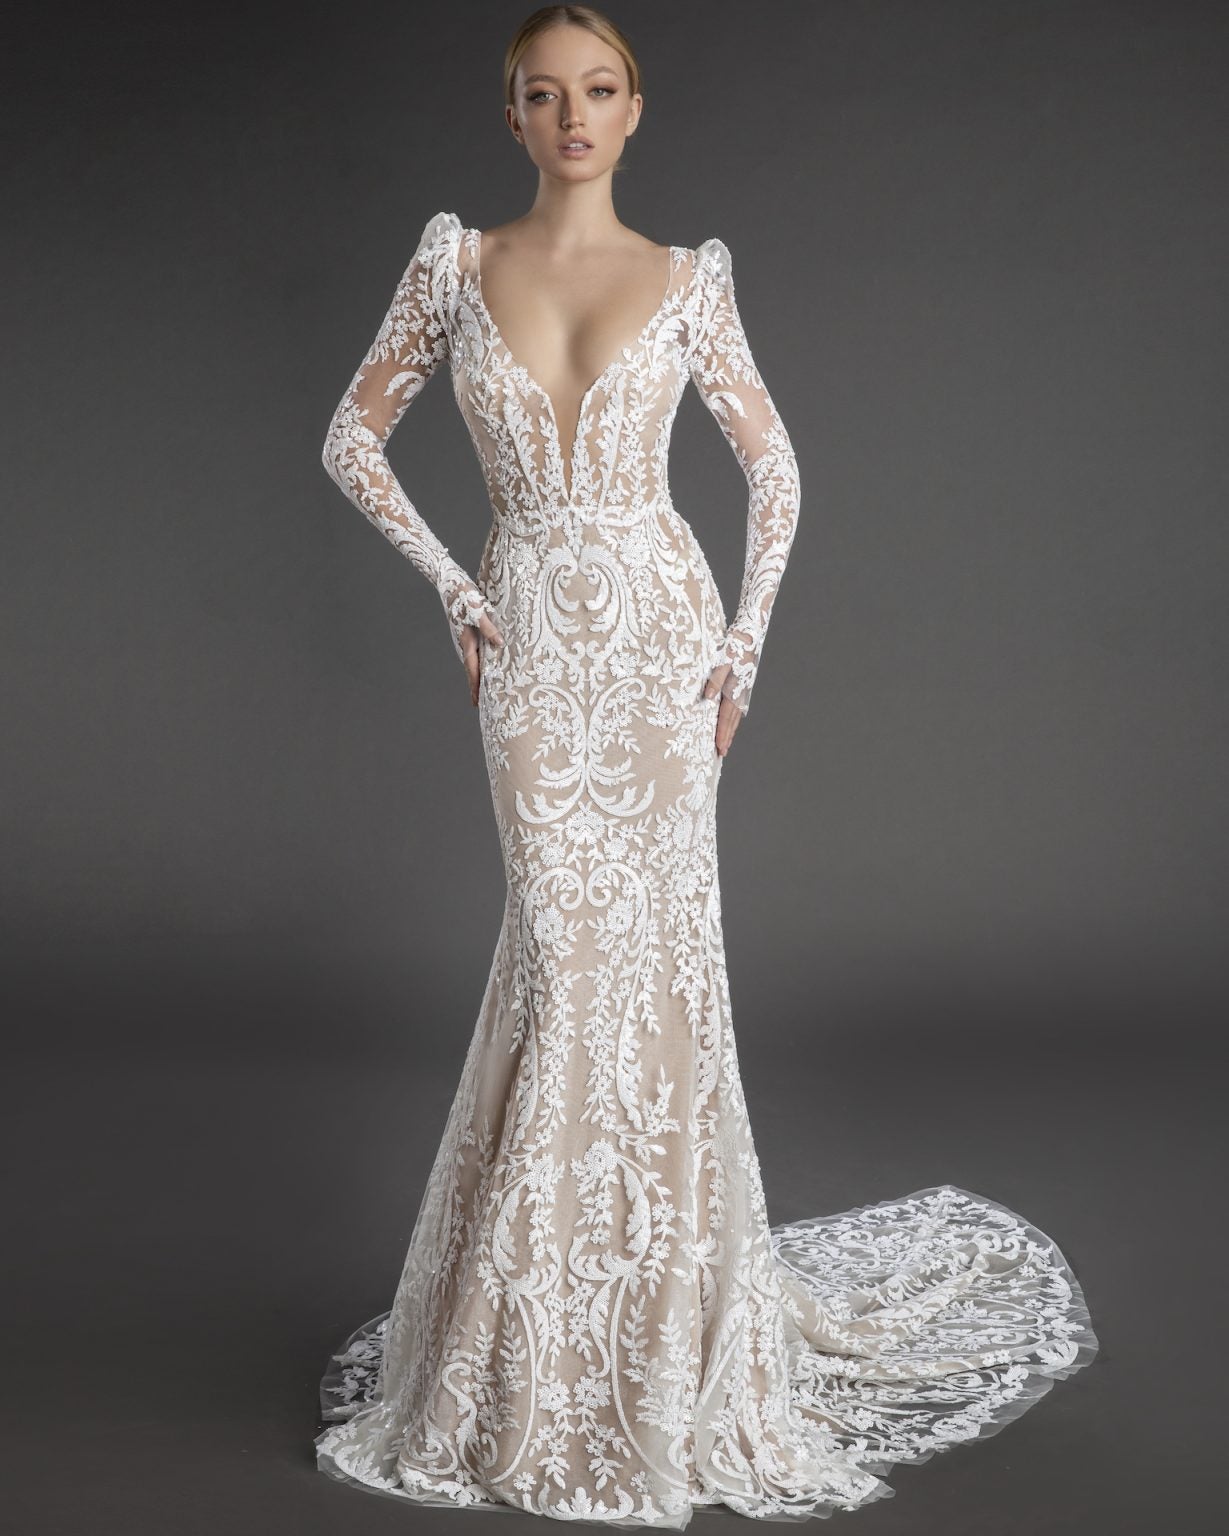 All Over Lace Long Puff Sleeve Sheath Wedding Dress With Plunging V